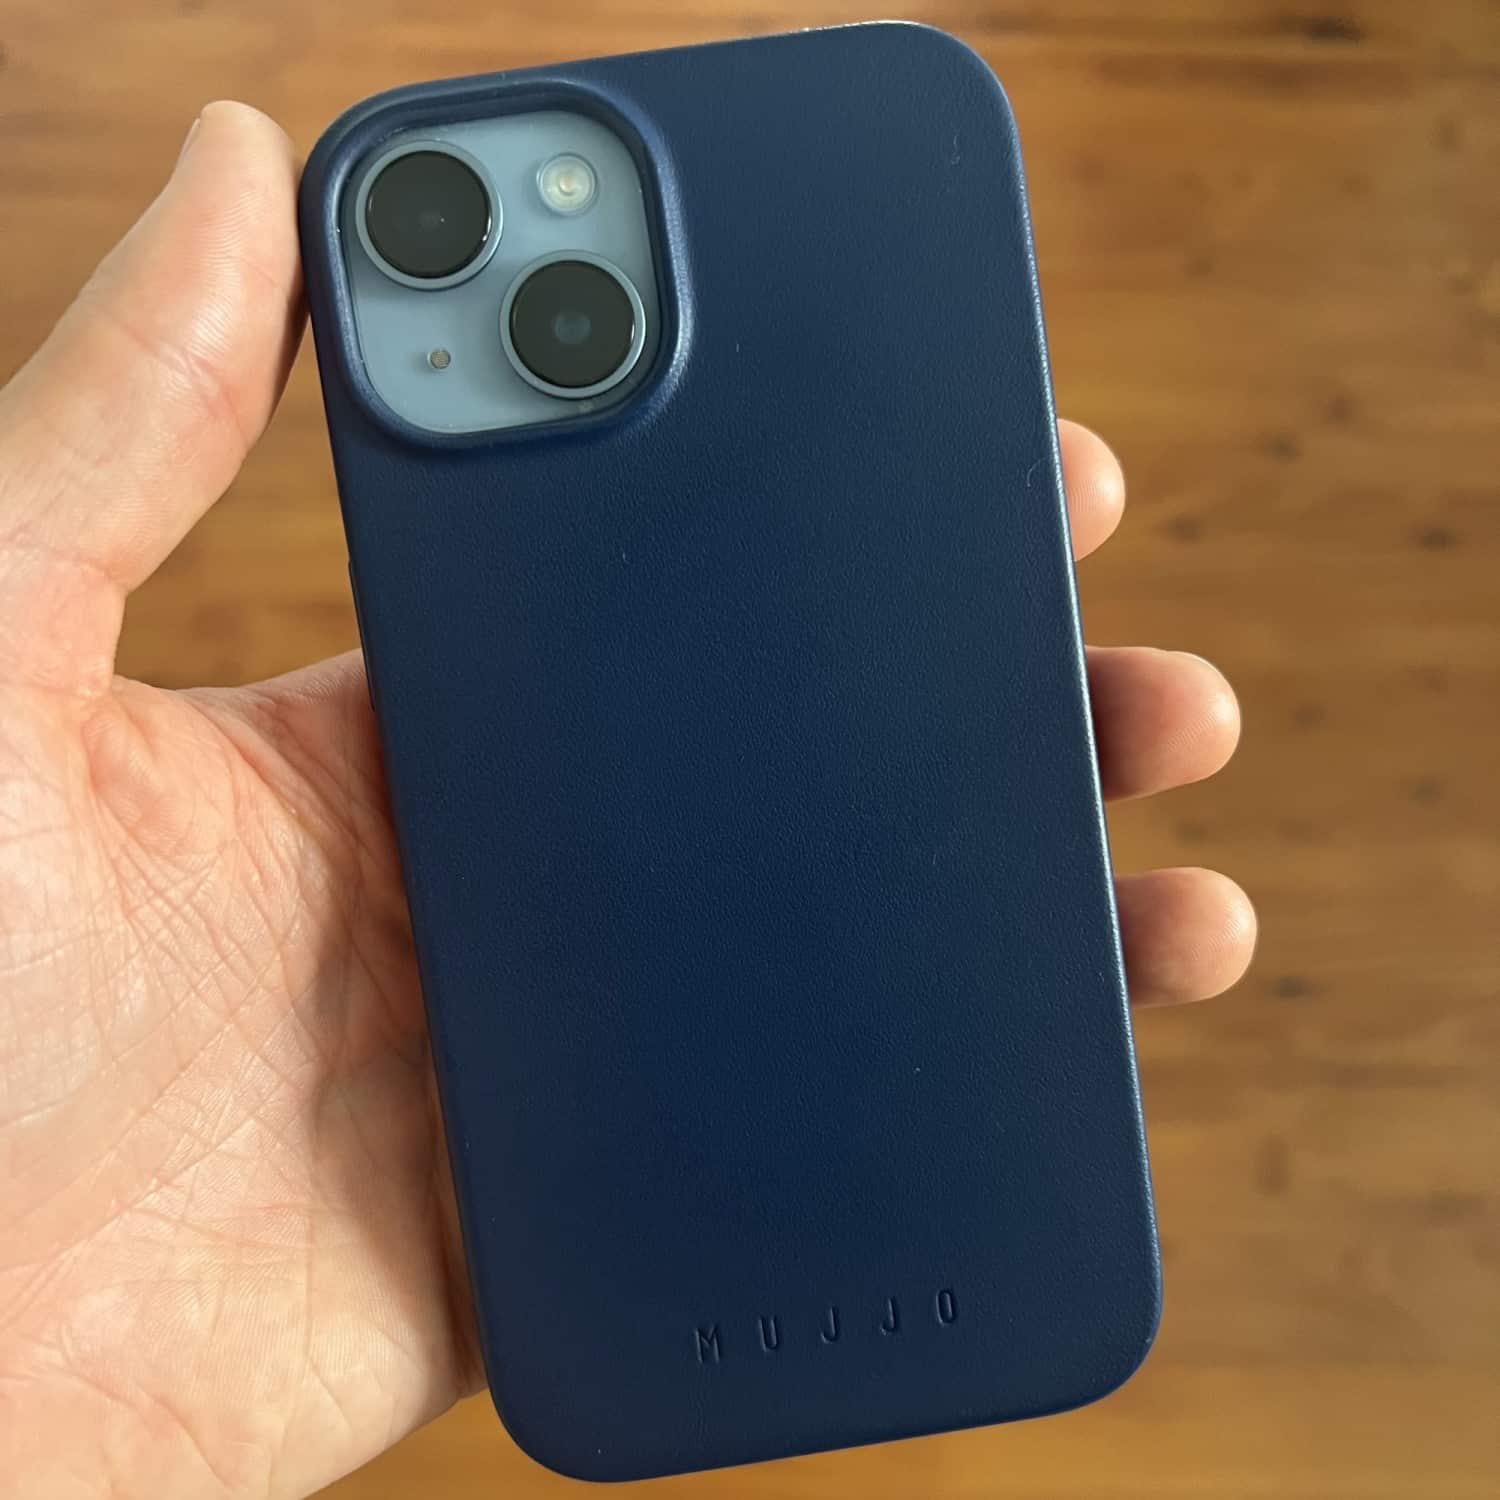 The Best iPhone 13 Pro Cases: Bellroy, Mujjo, Nomad and More